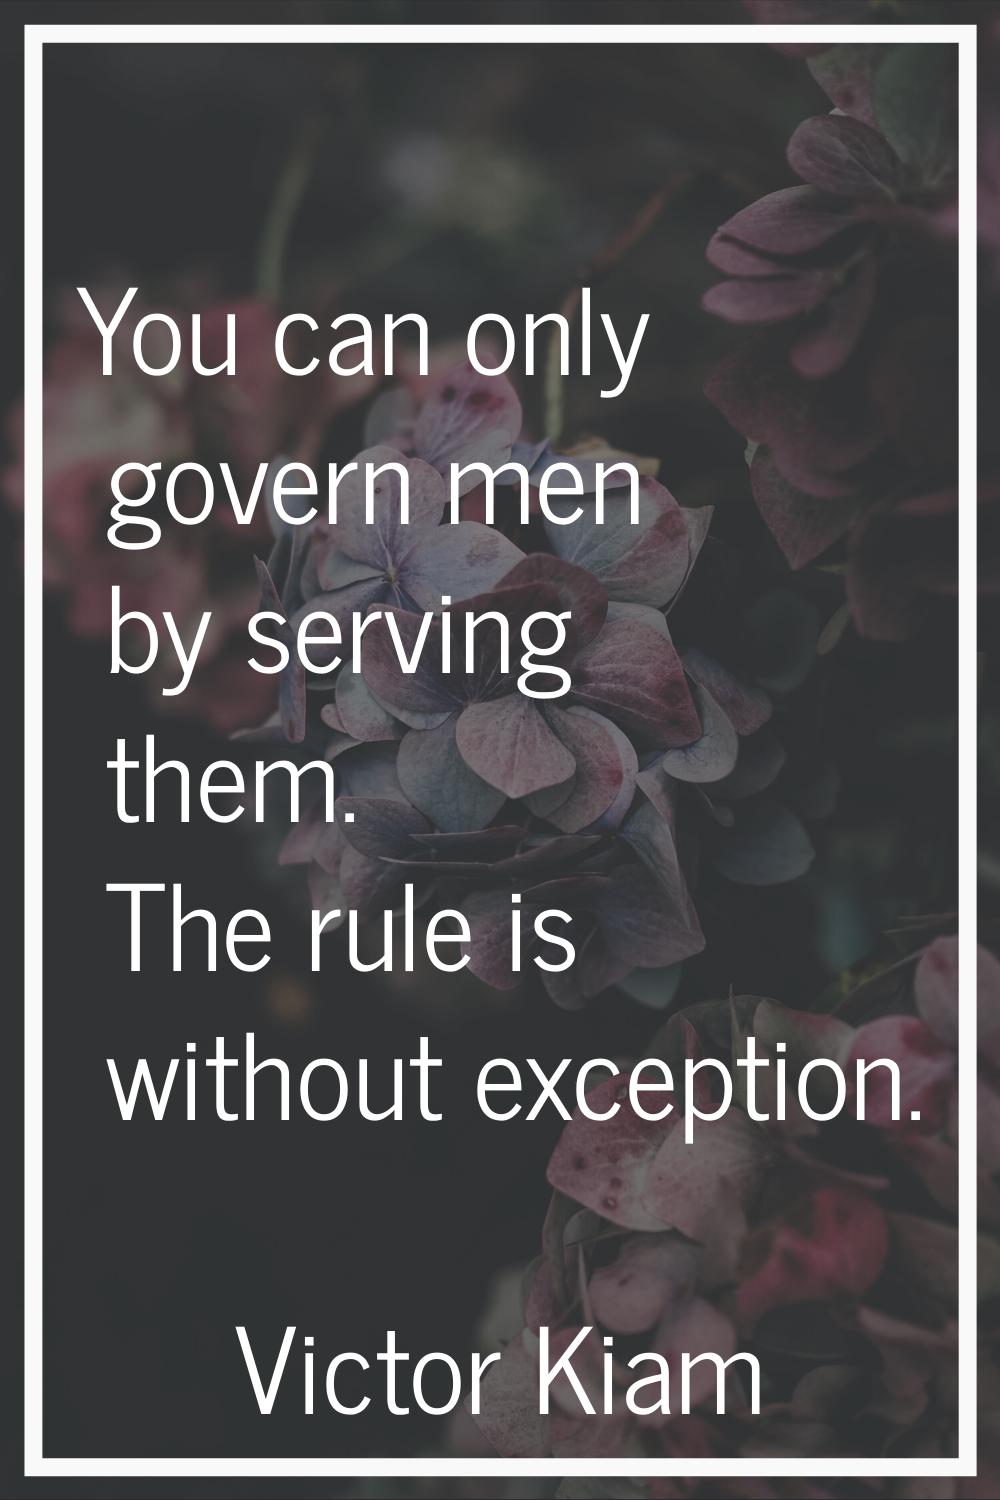 You can only govern men by serving them. The rule is without exception.